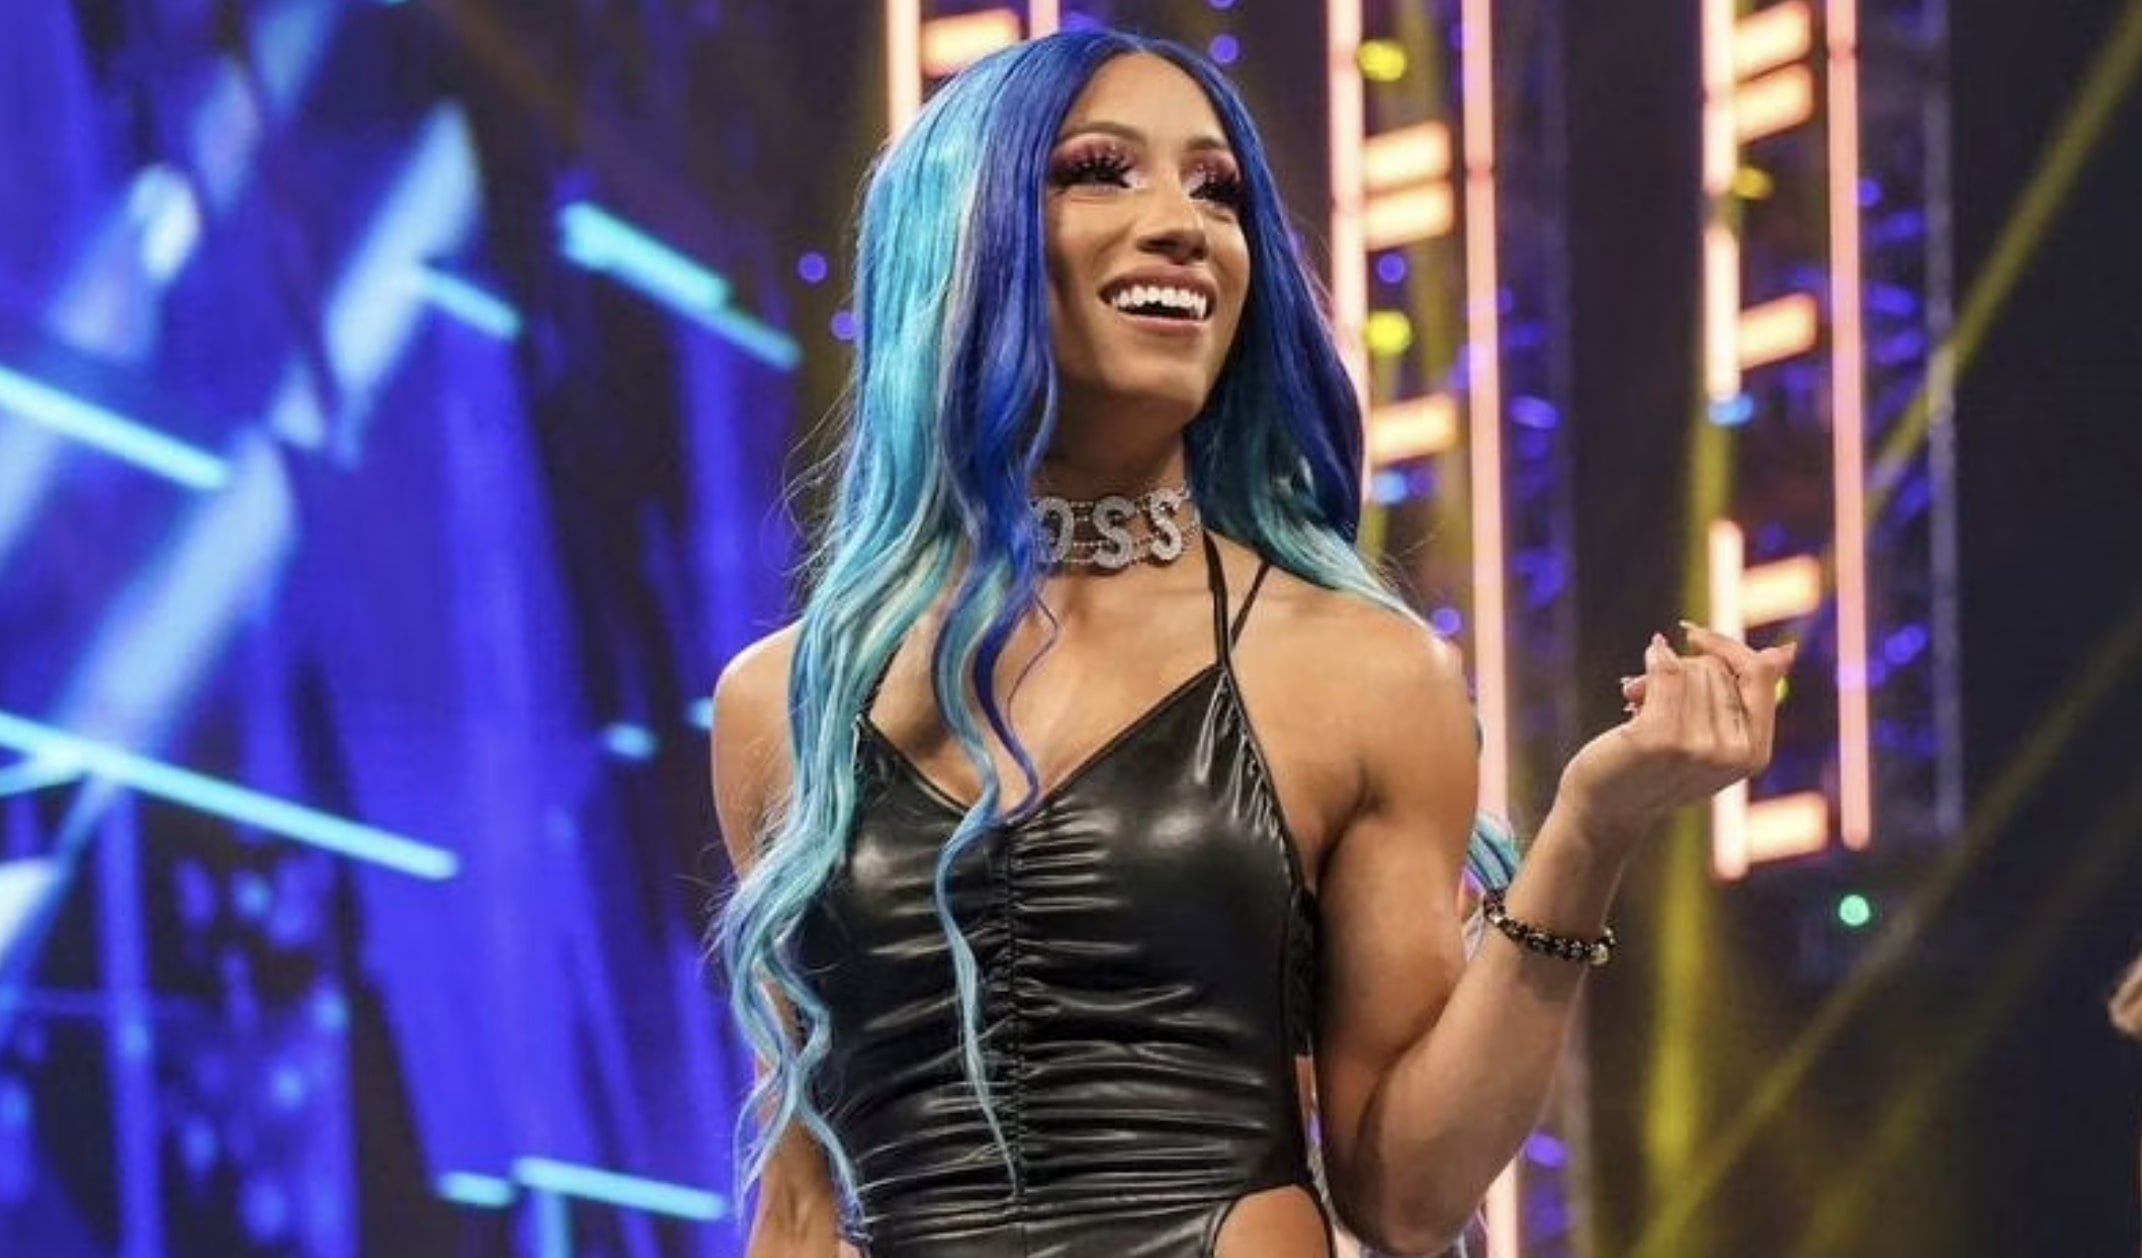 Sasha Banks Shows Off New Look In Photo With Released WWE Star